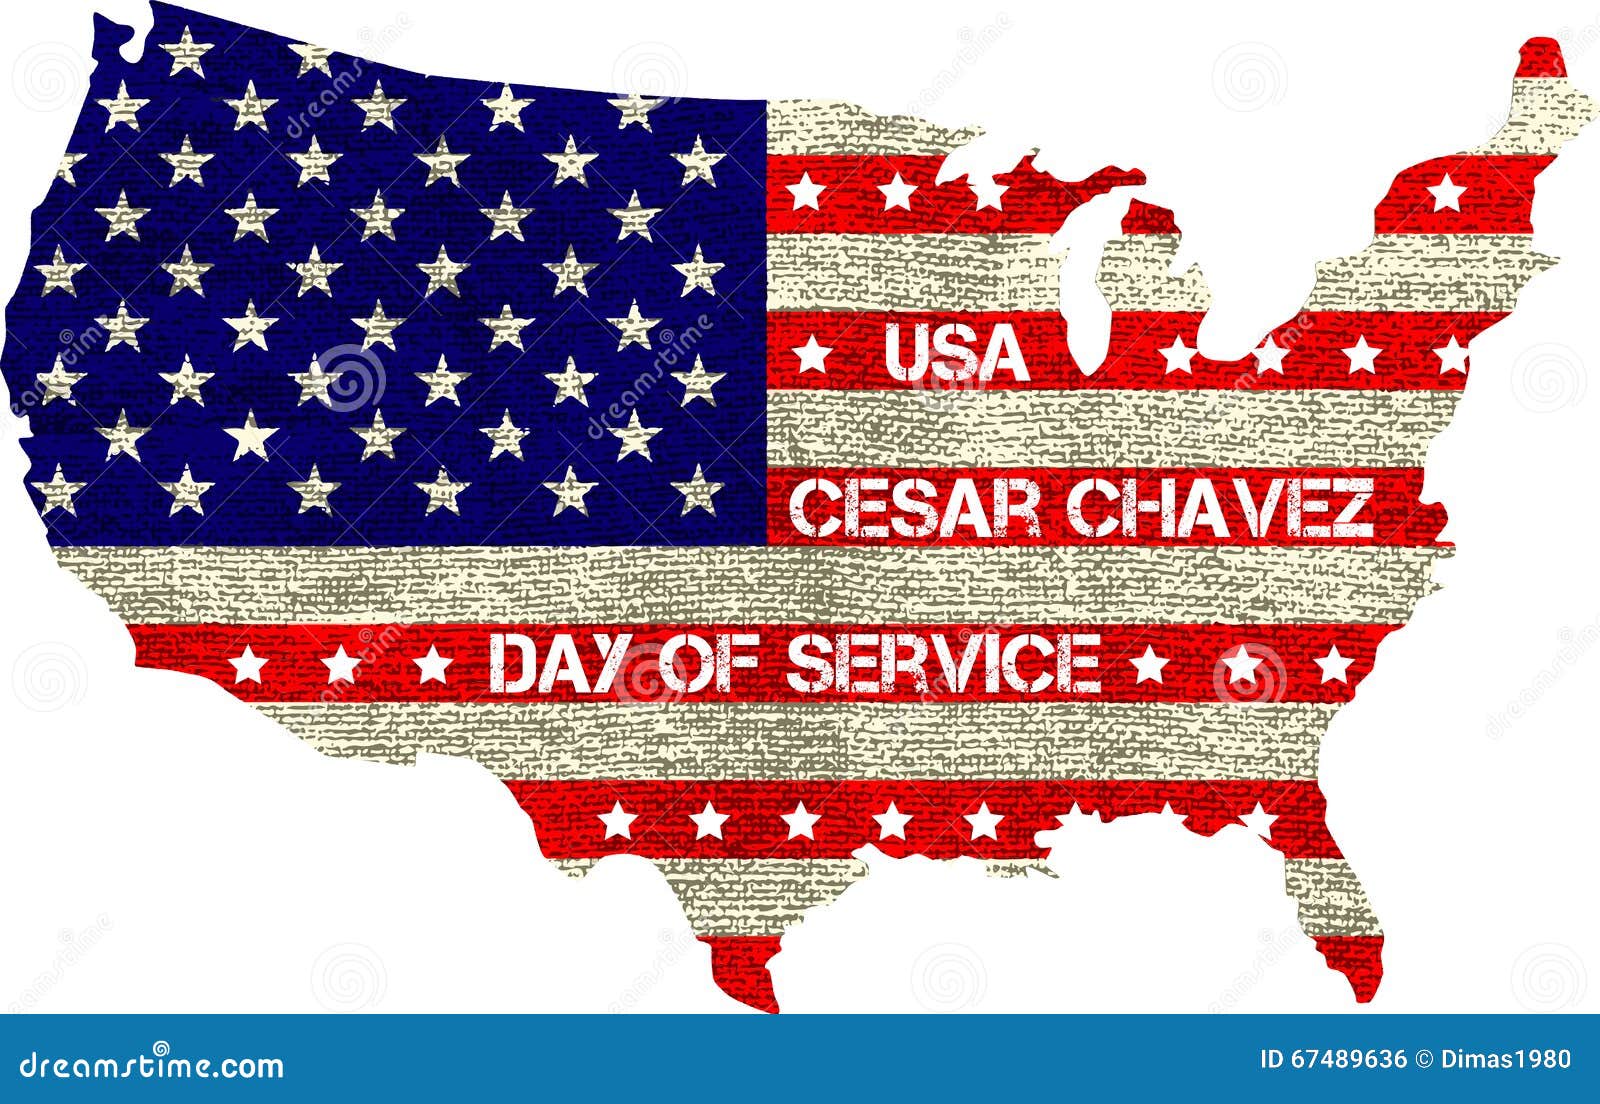 cesar chavez, day of service